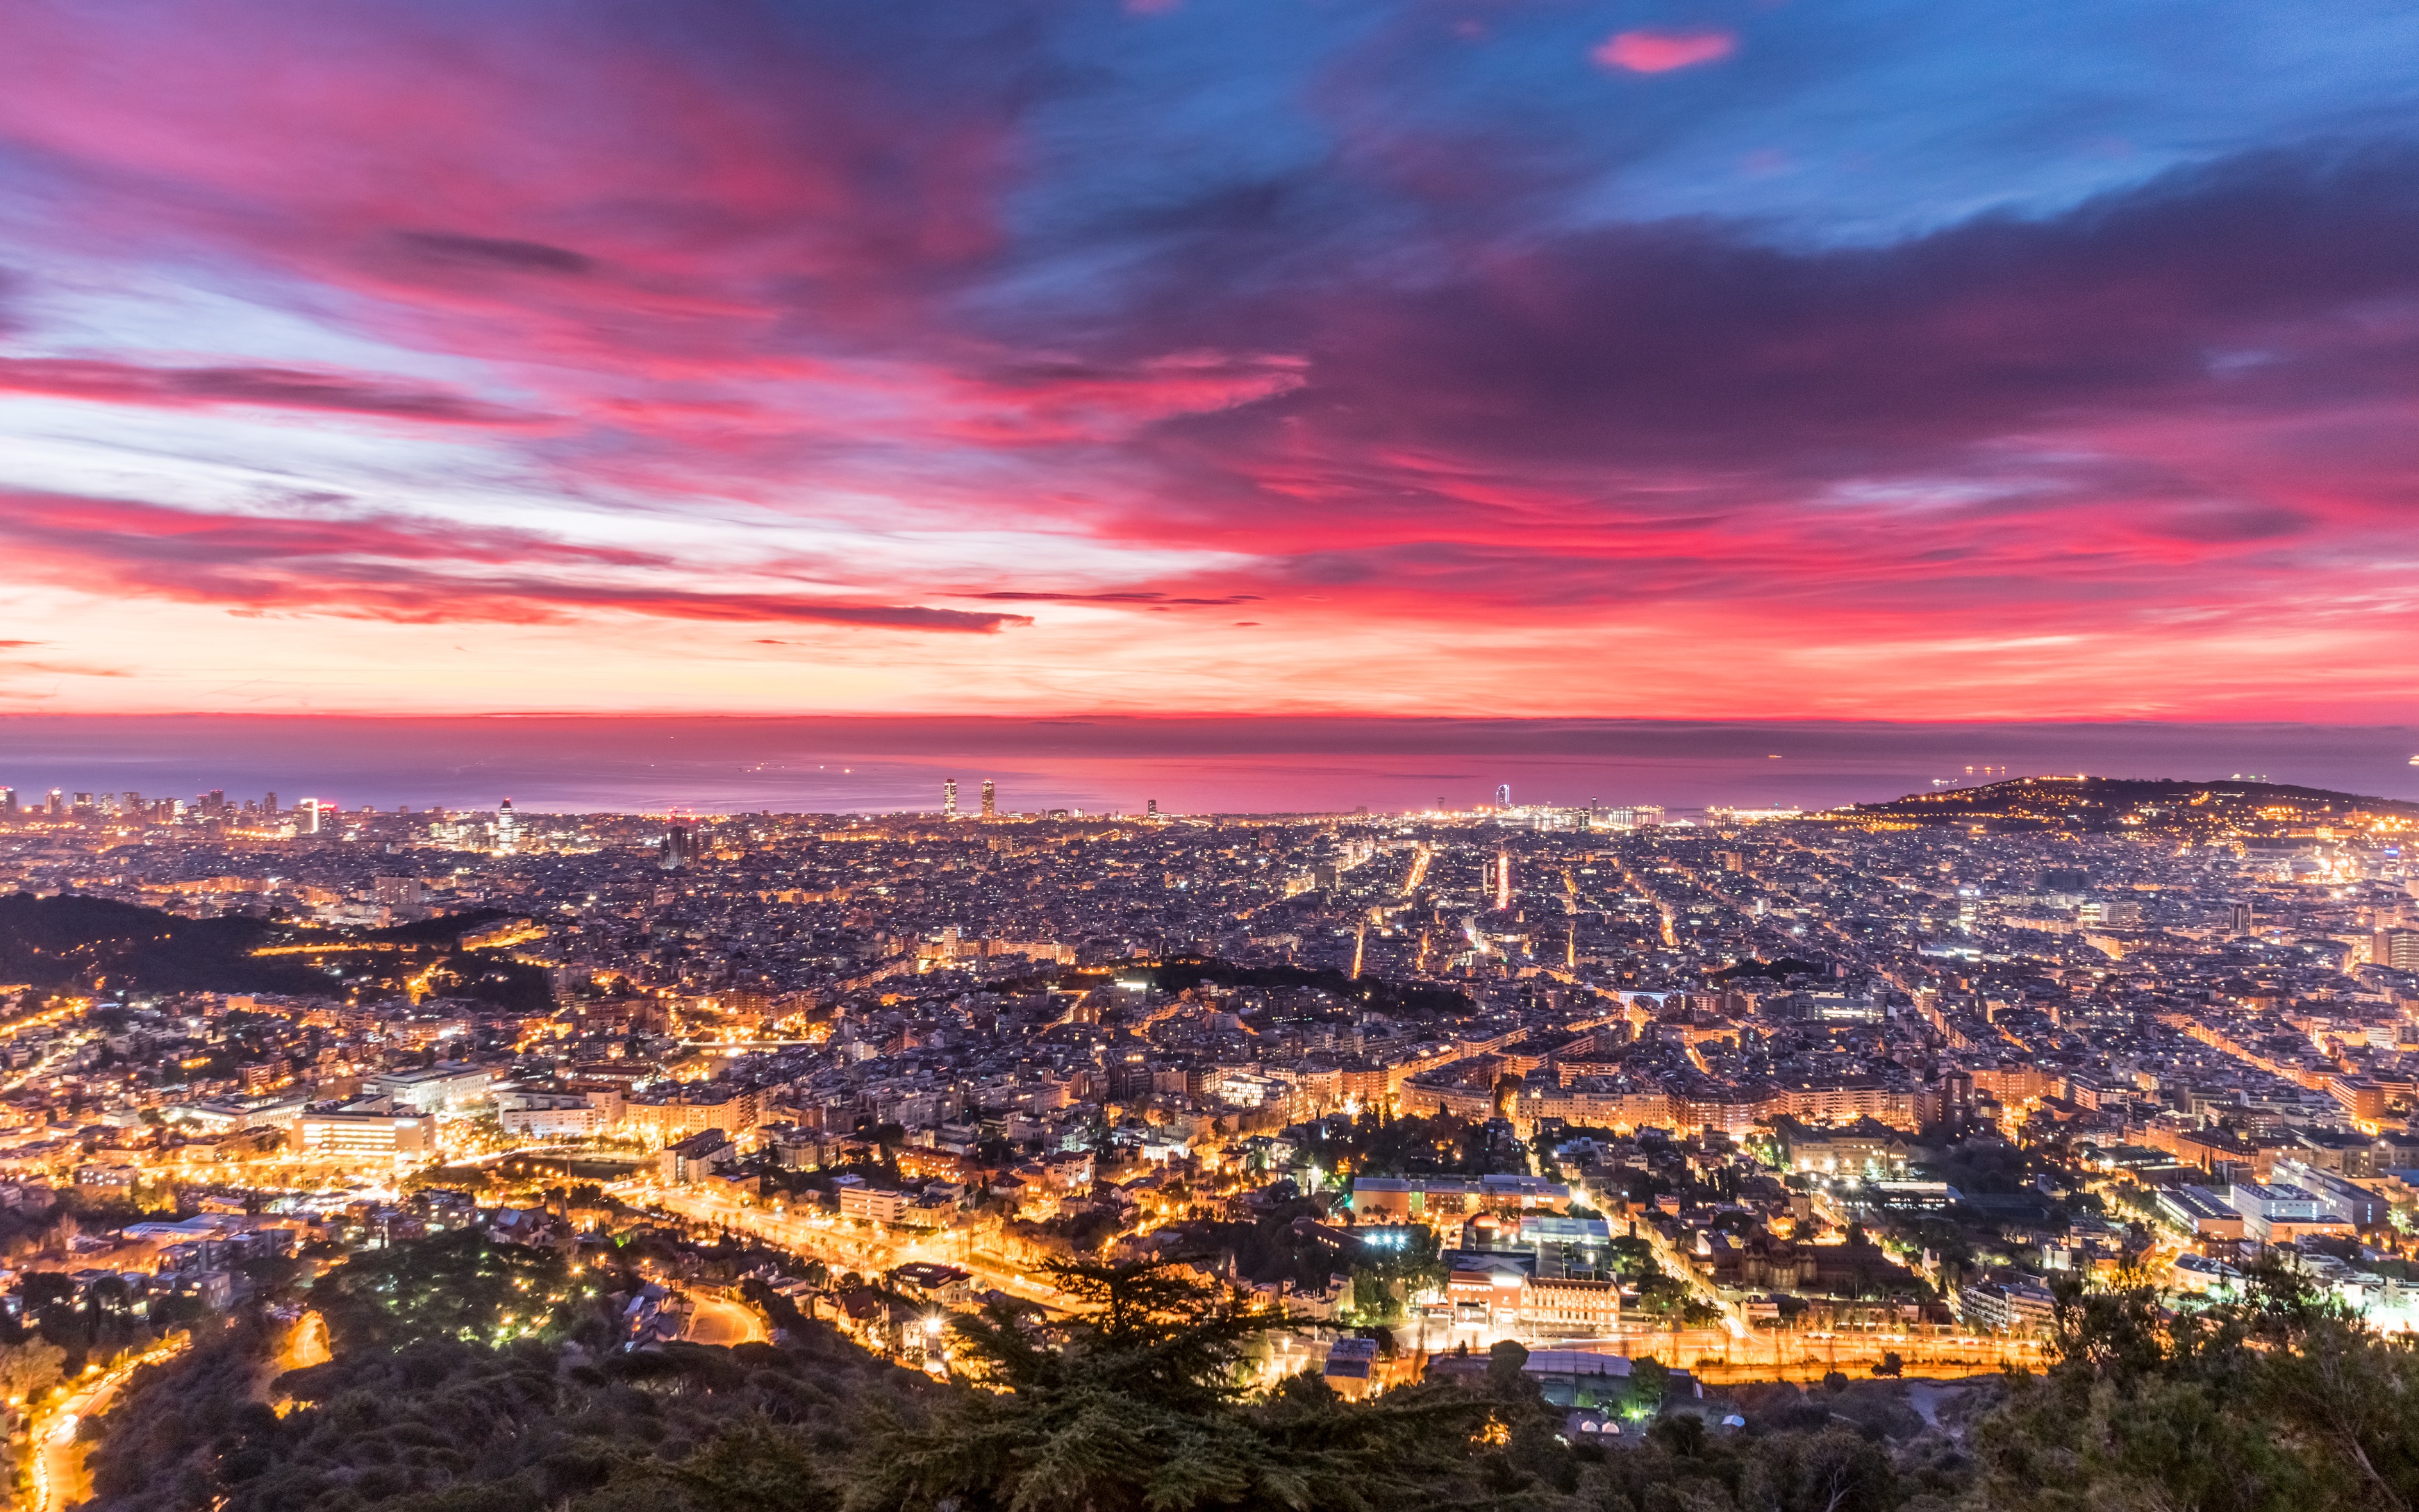 3rd Place Dawn over Barcelona from Fabra Observatory by Alfons Puertas @alfons_pc